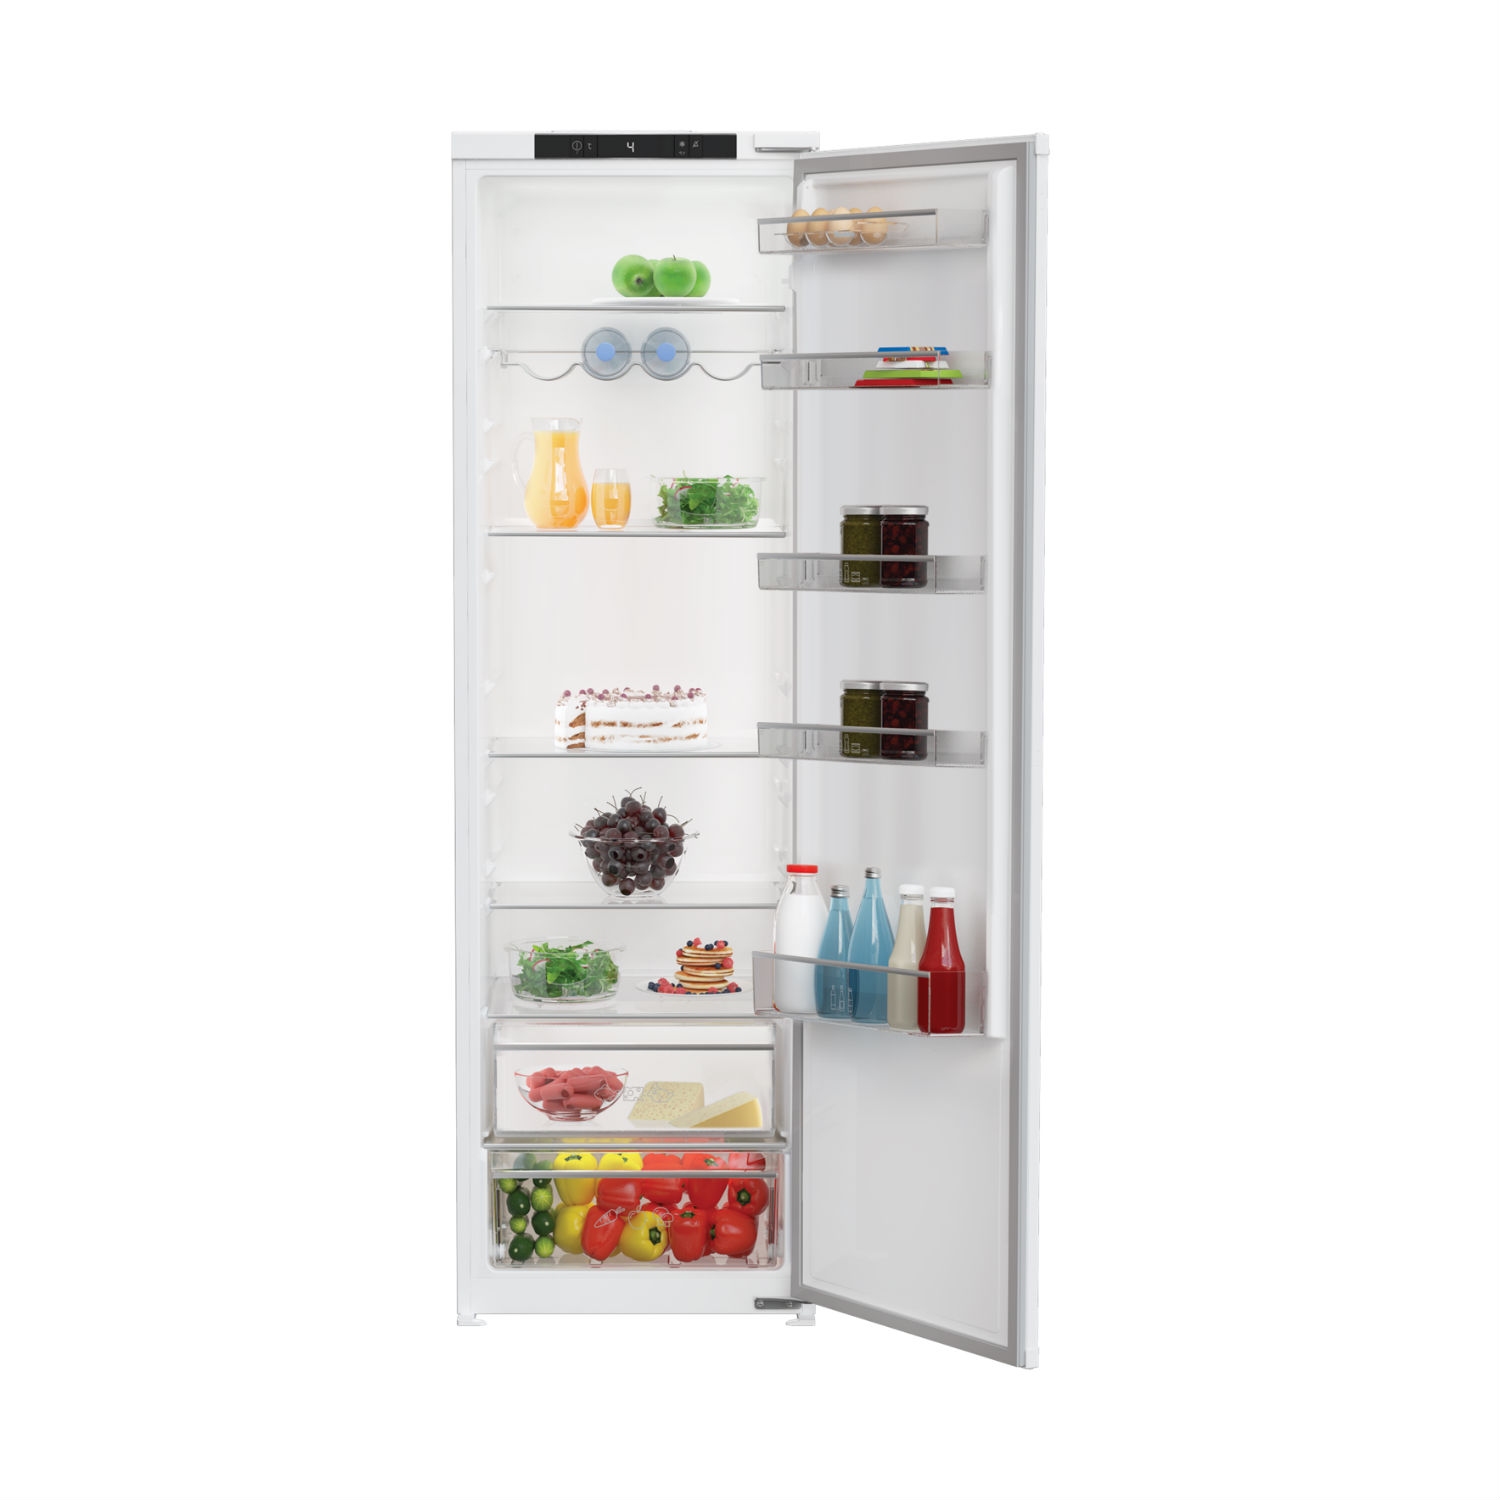 Blomberg SST455i Electronic Touch Control Display Larder - Integrated - A+ Energy Rated - 0